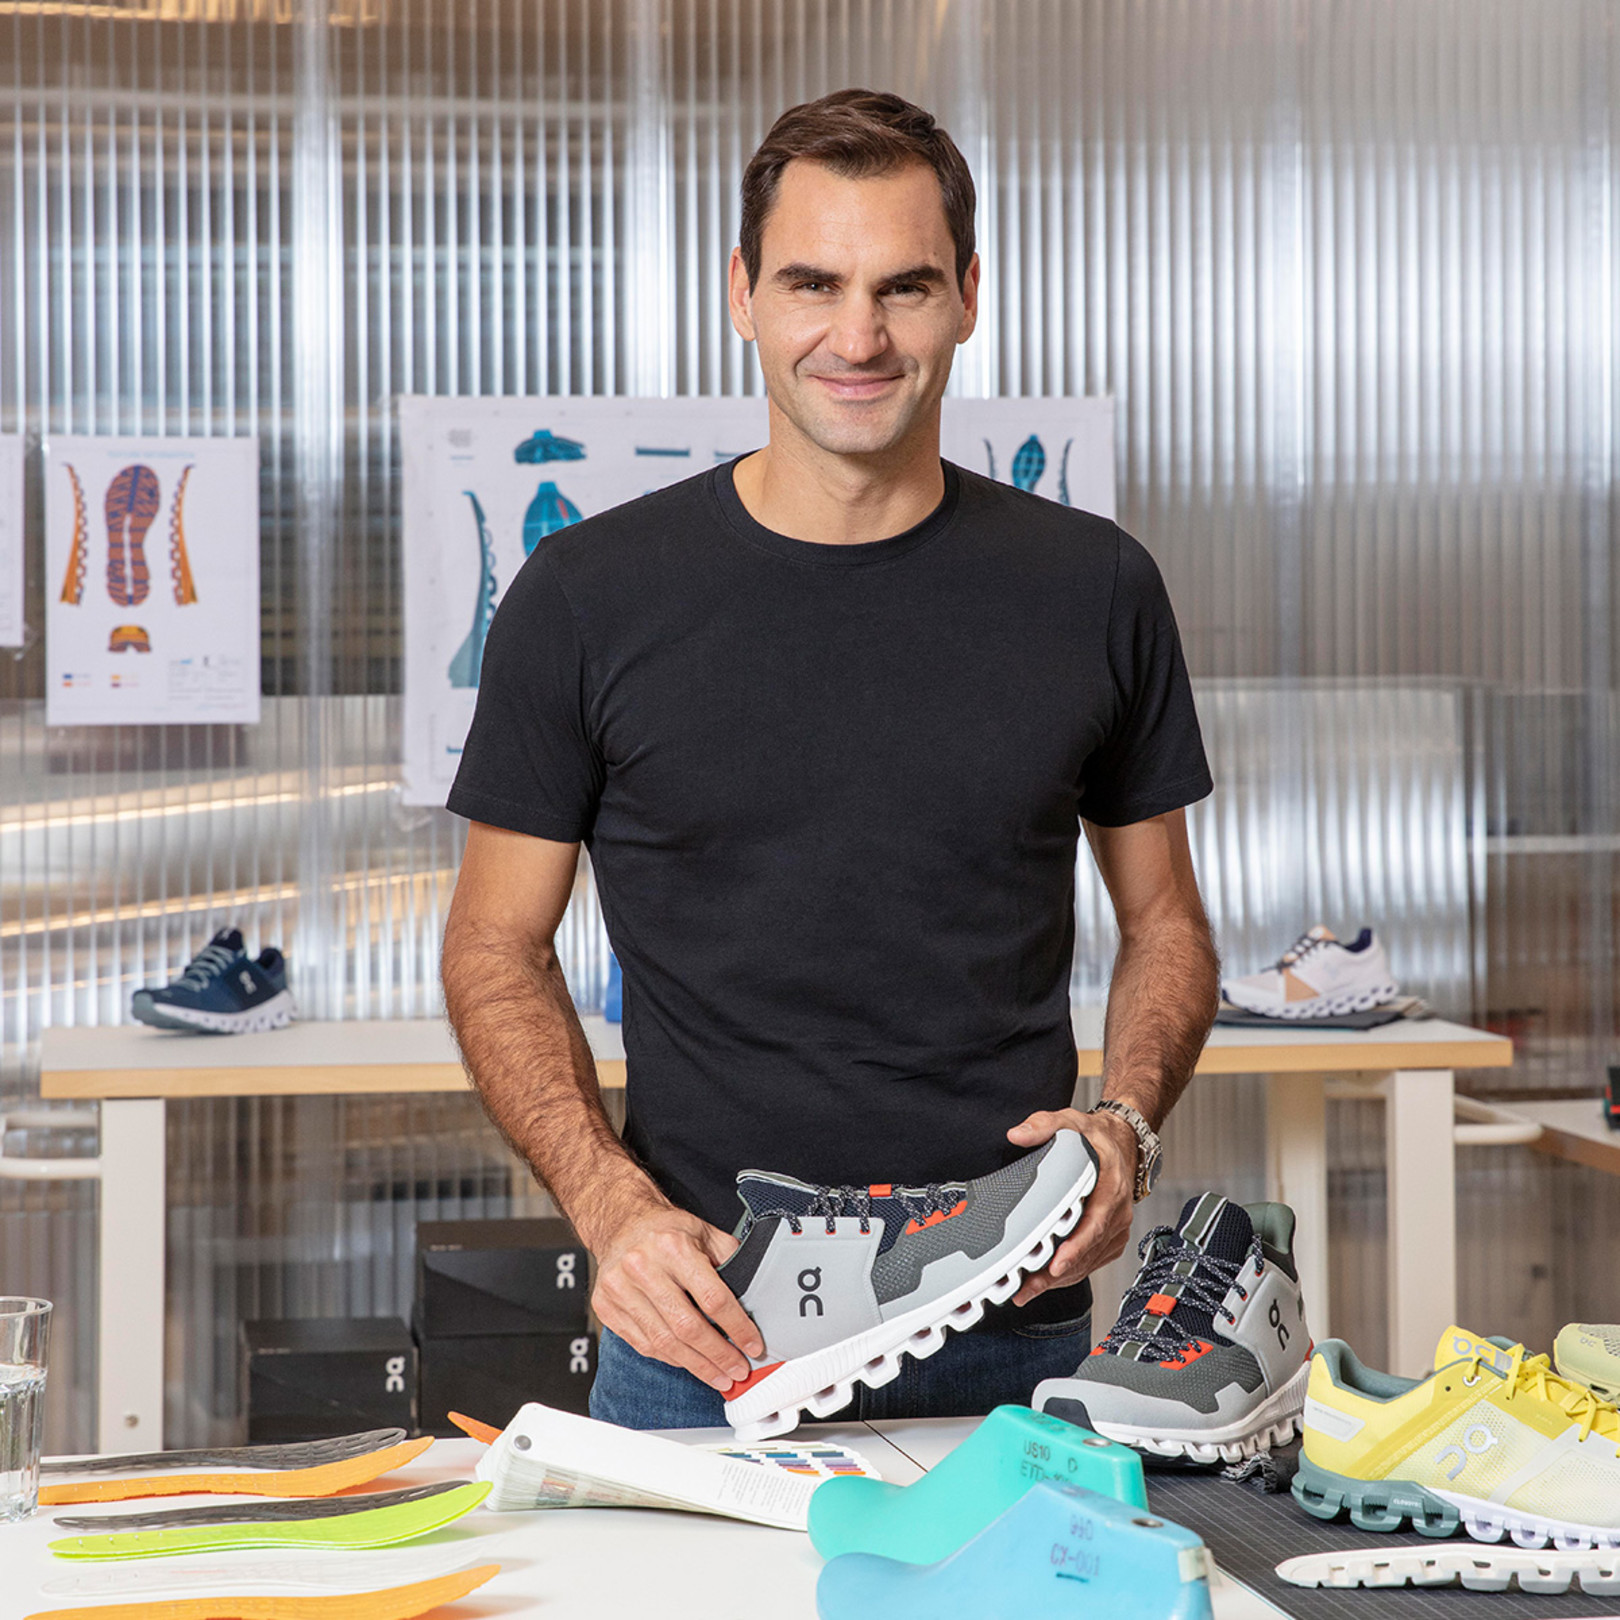 What tennis gear does Swiss sensation Roger Federer use on the courts?